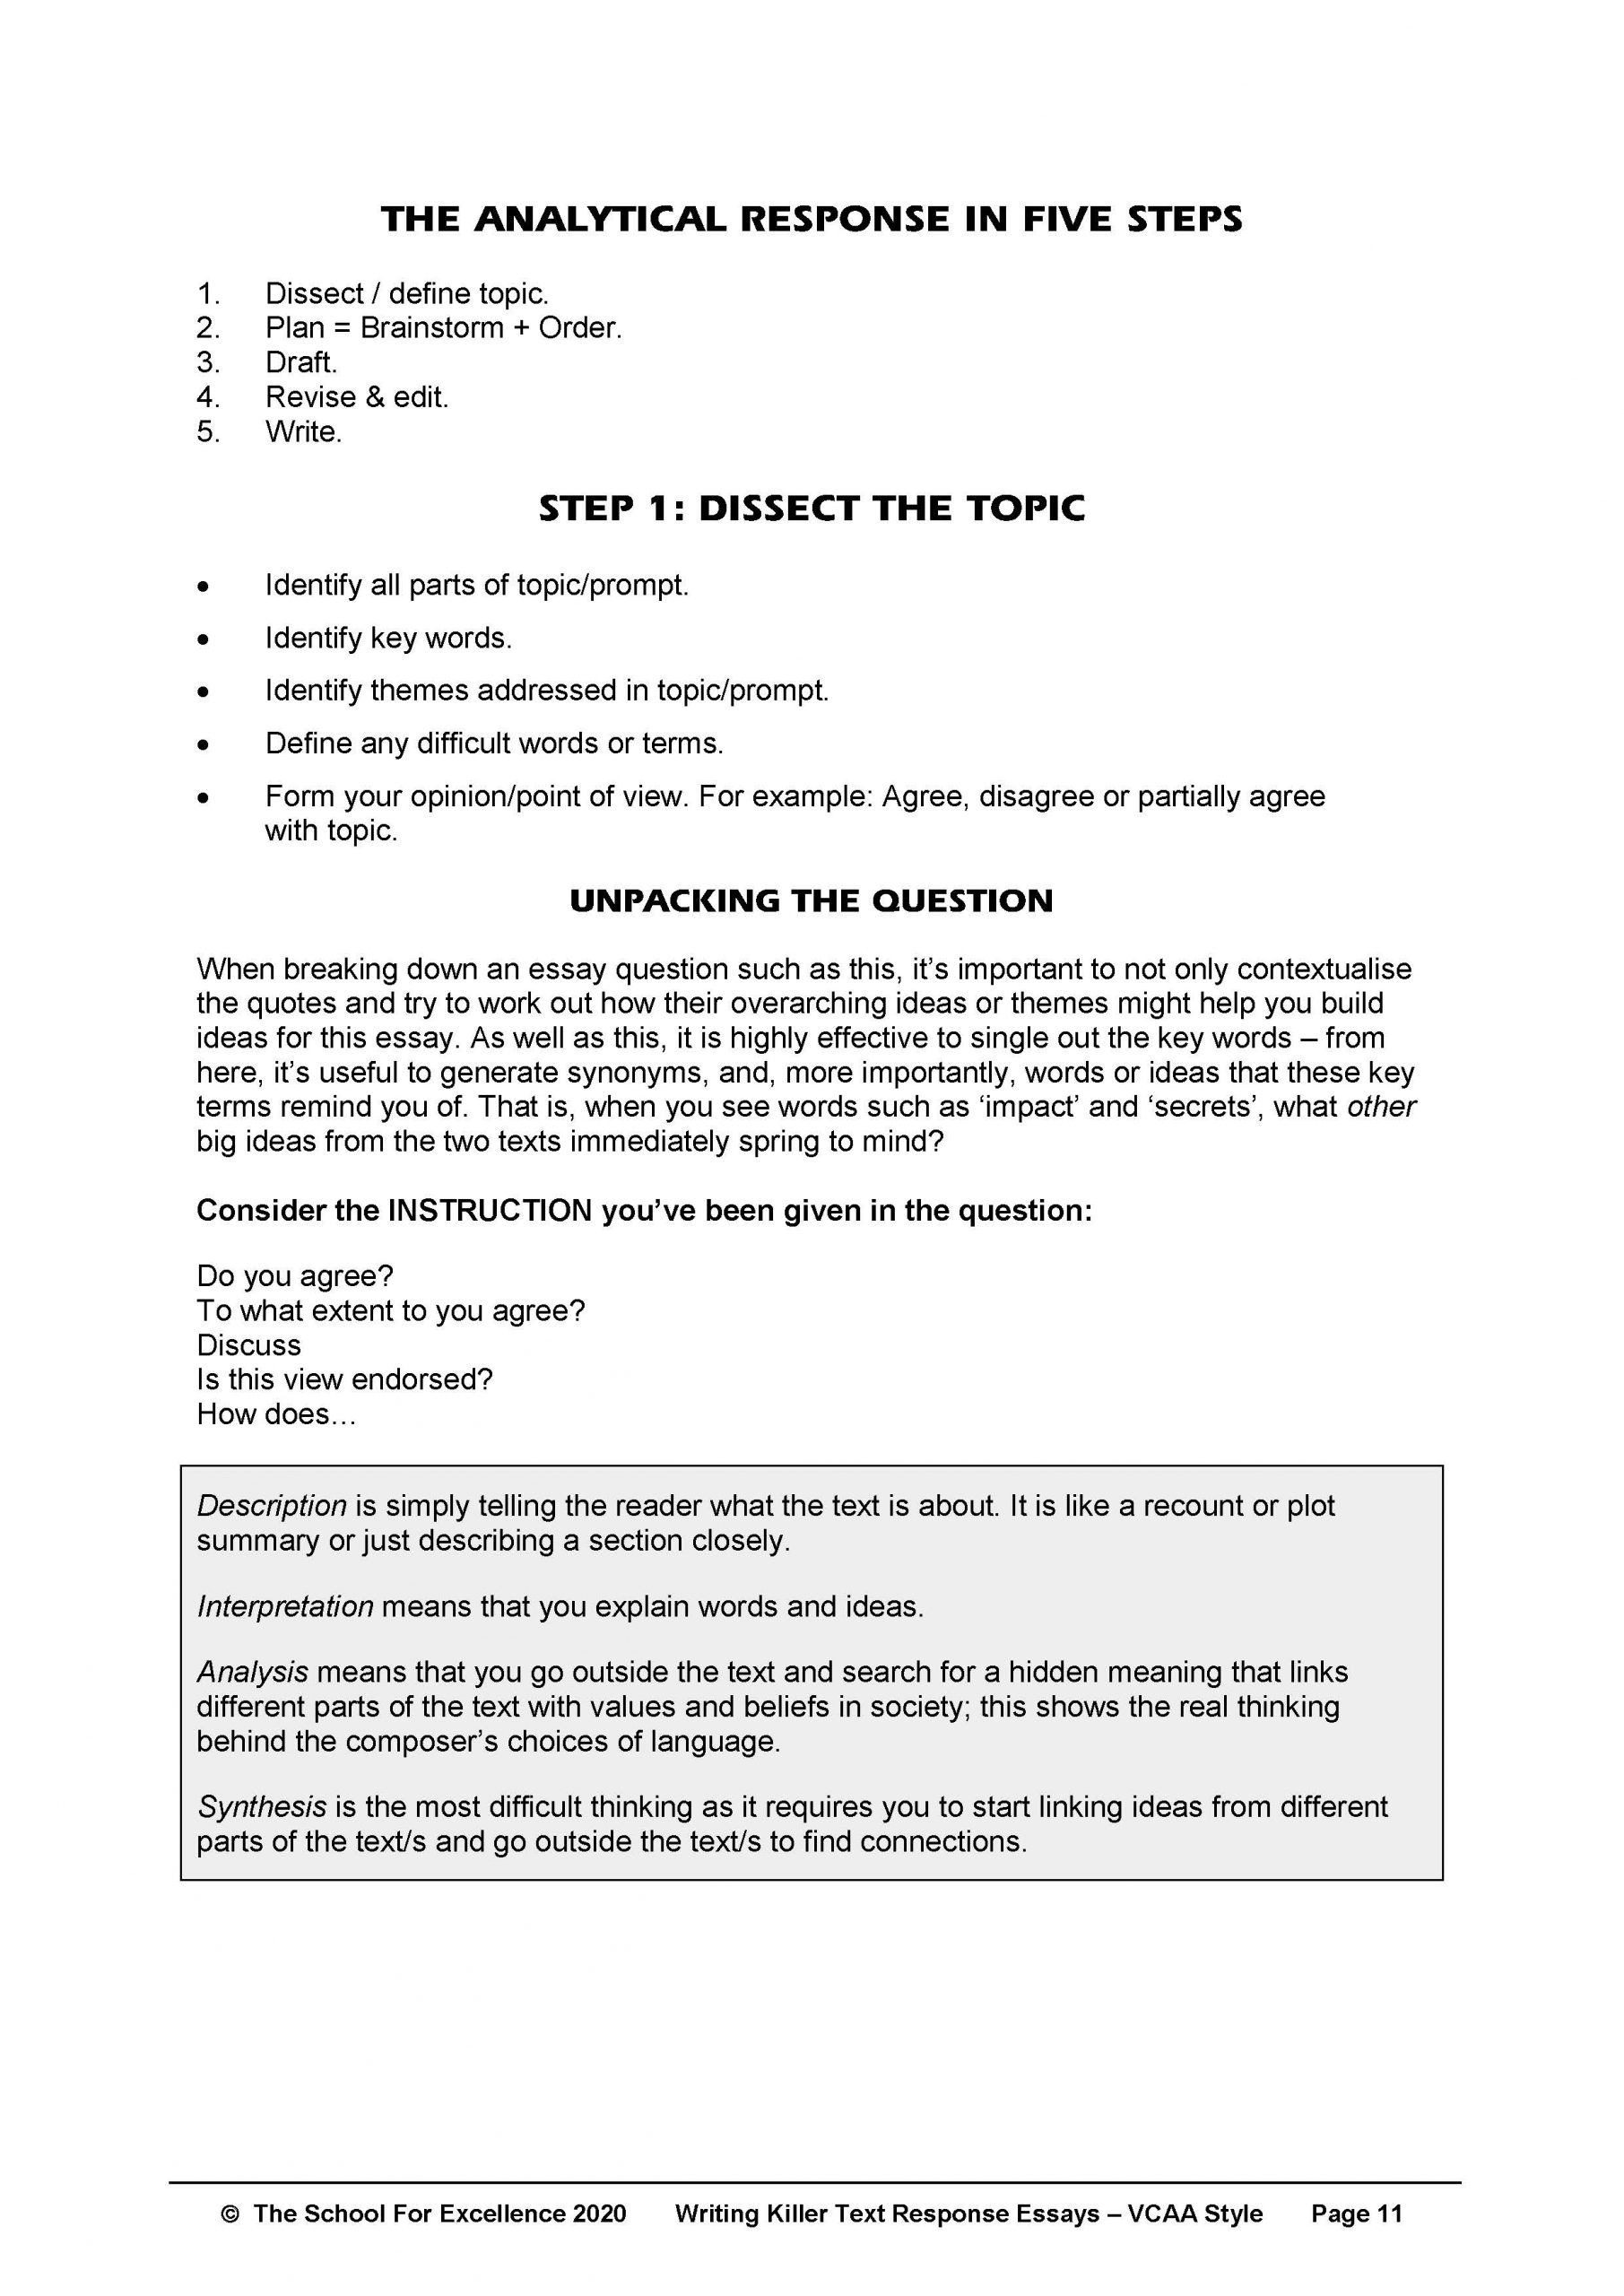 VCE-Writing-Killer-Text-Response-Essays – Sample_Page_24  TSFX